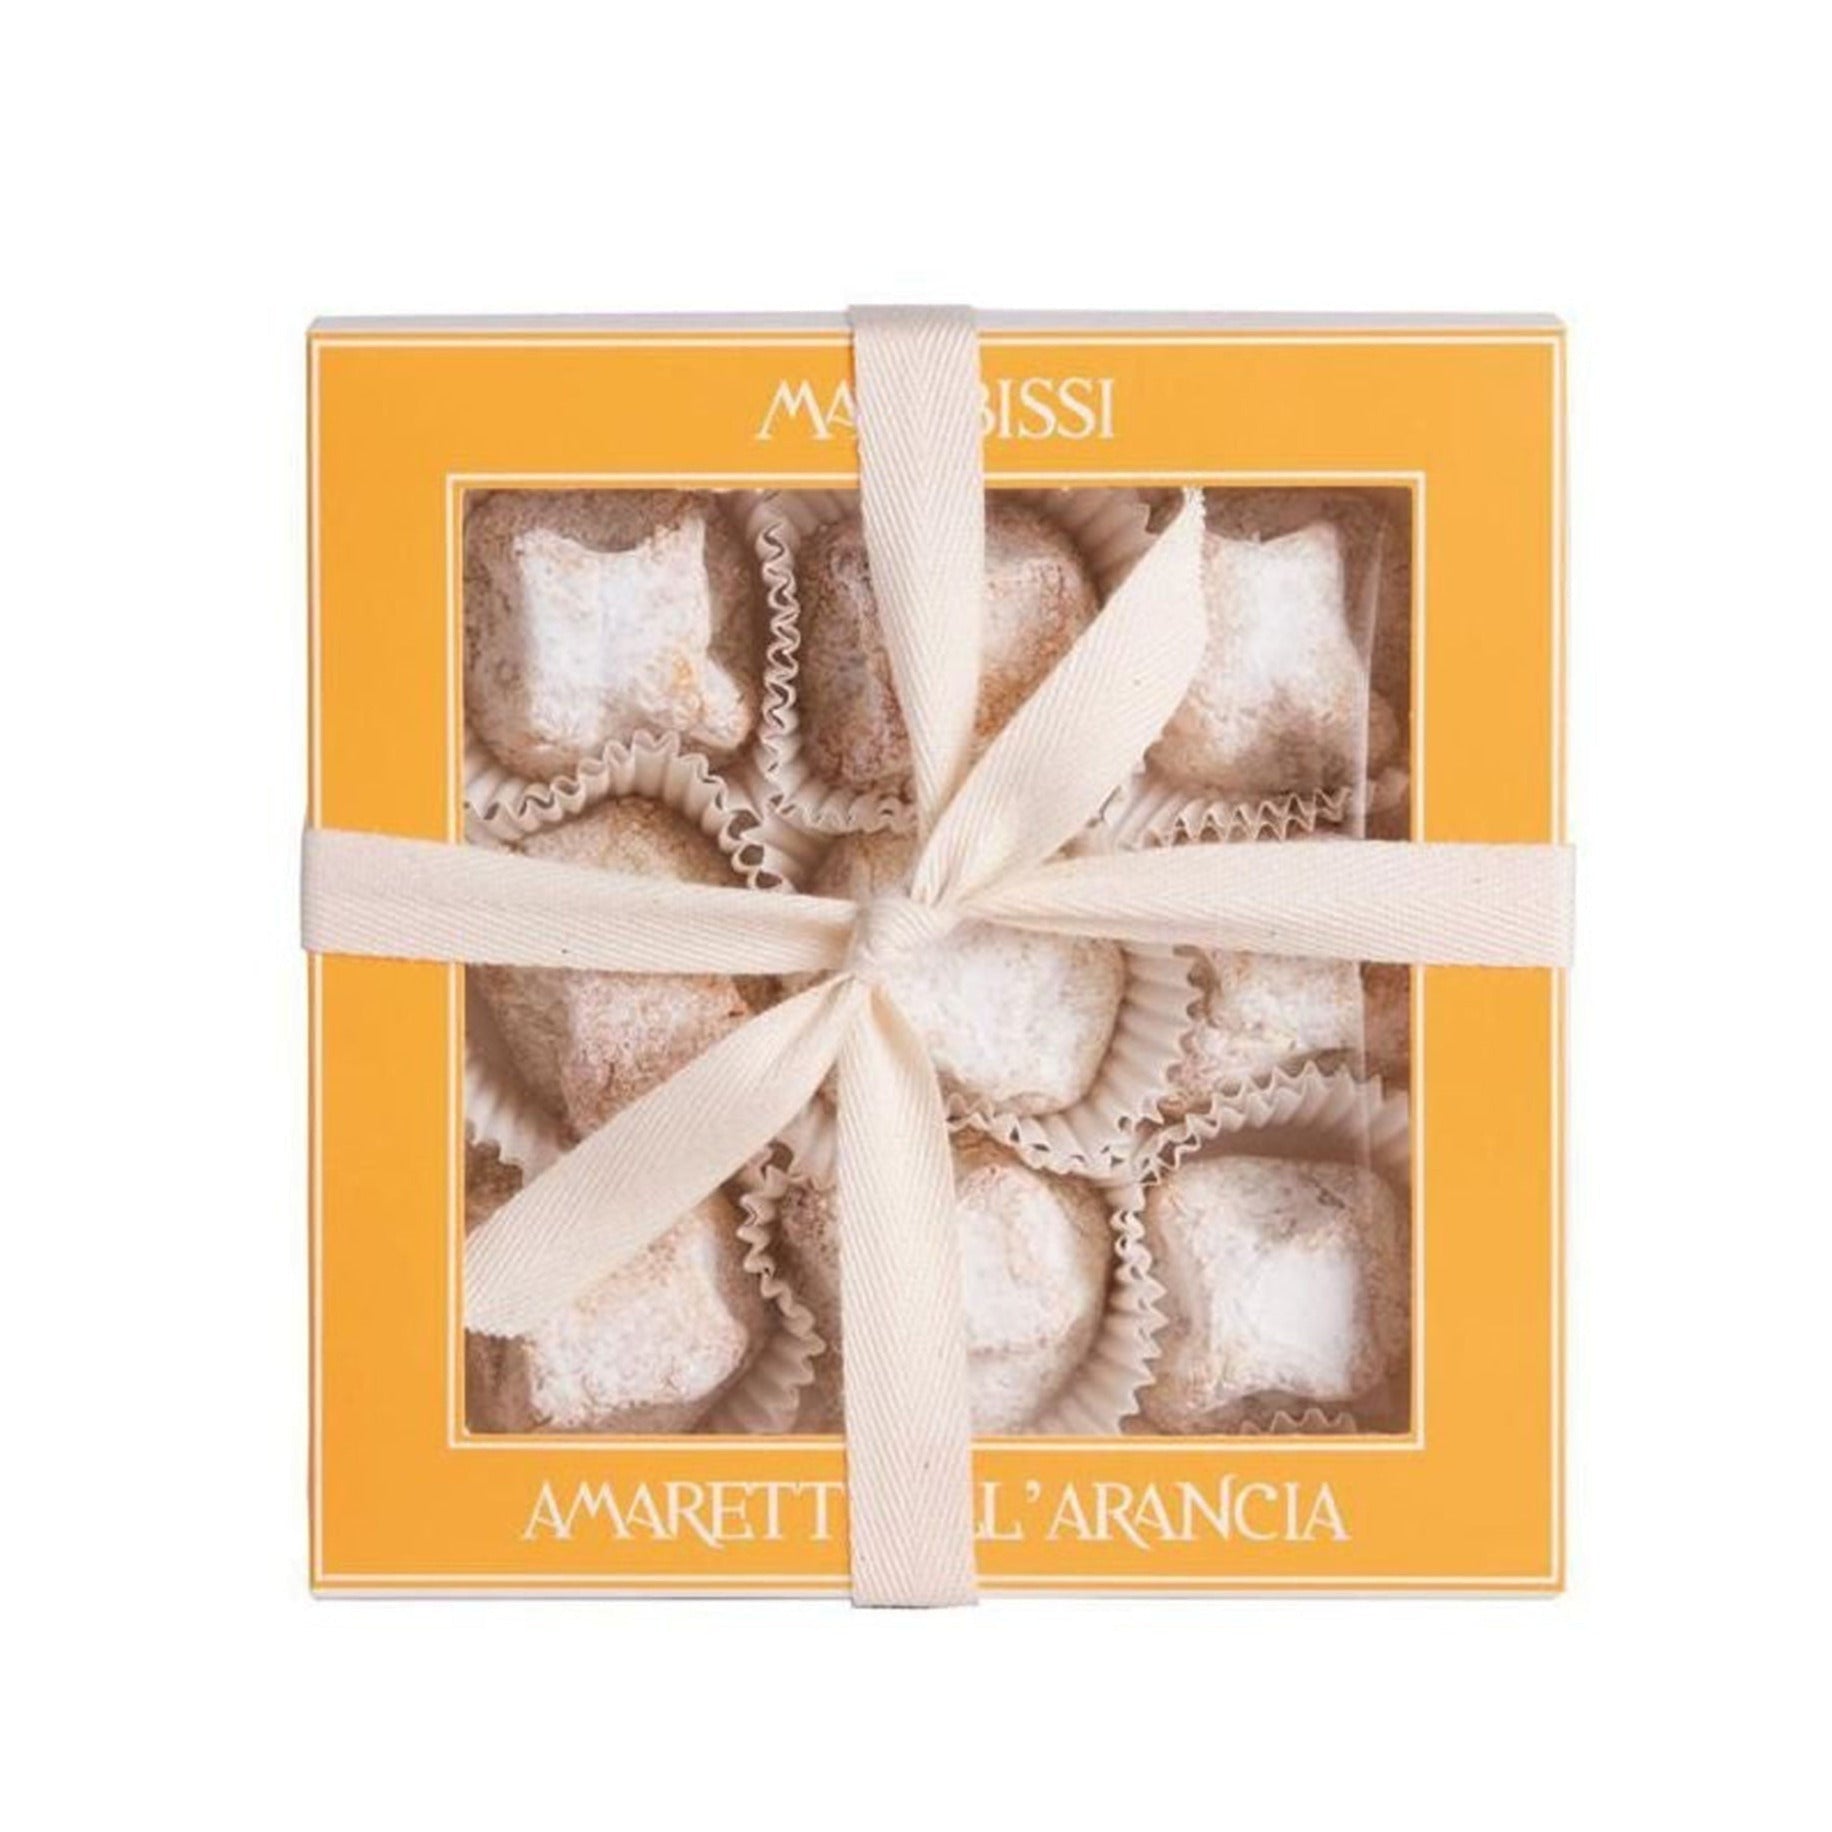 Marabissi Soft Orange Amaretti (Box) 190g  | Imported and distributed in the UK by Just Gourmet Foods